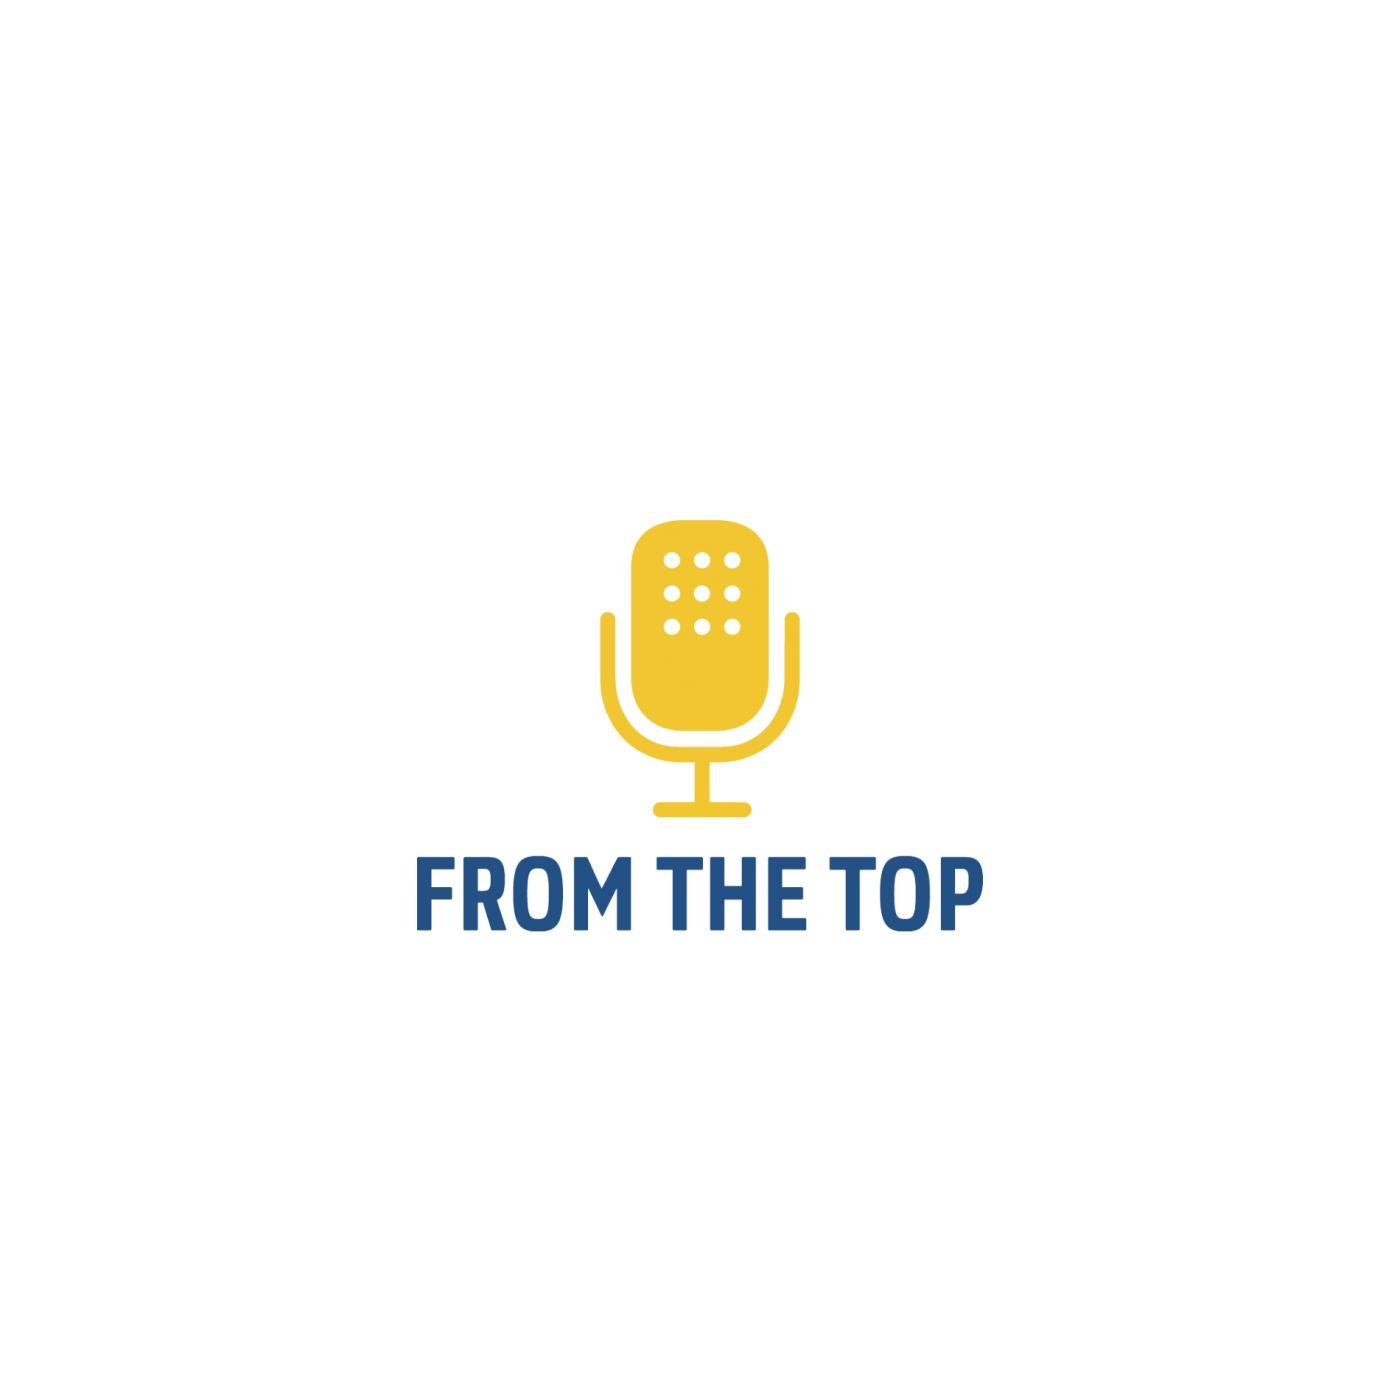 From the Top logo